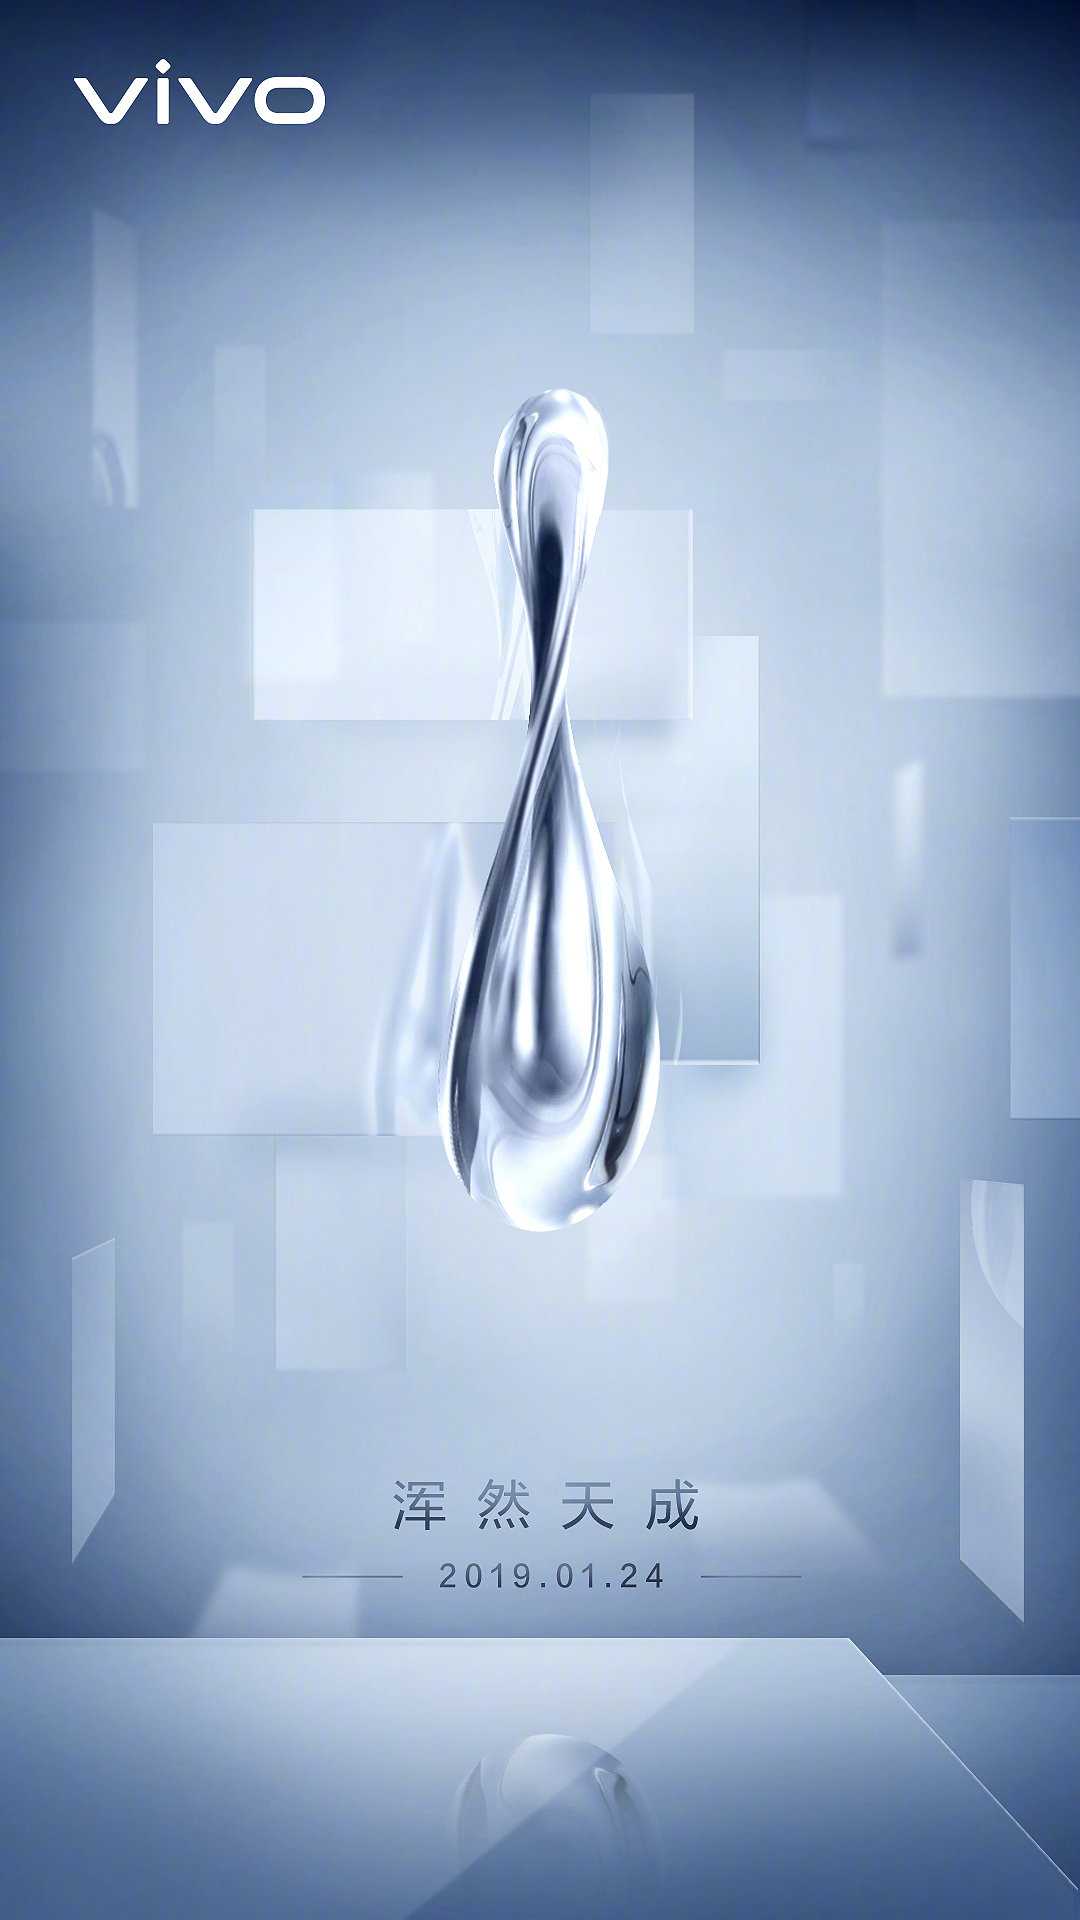 Vivo Gearing-up To Unveil “Waterdrop” Smartphone In China